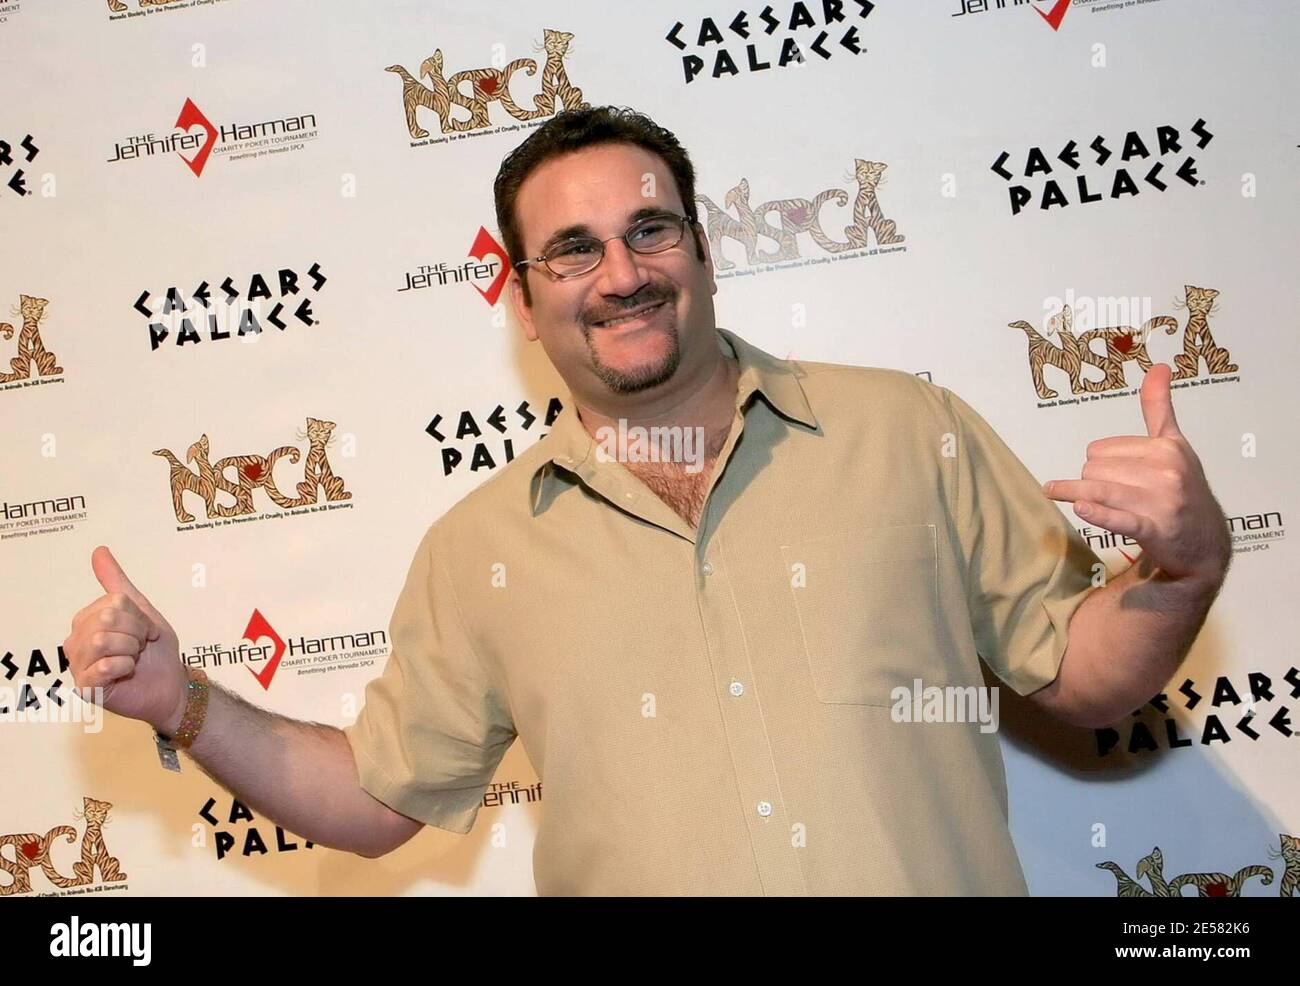 Mike Matusow participates in the inaugural Jennifer Harmon Charity Poker  Tournament in Las Vegas, Nevada at Caesars Palace on April 20, 2007. The  tournament featured the best poker players in the world,